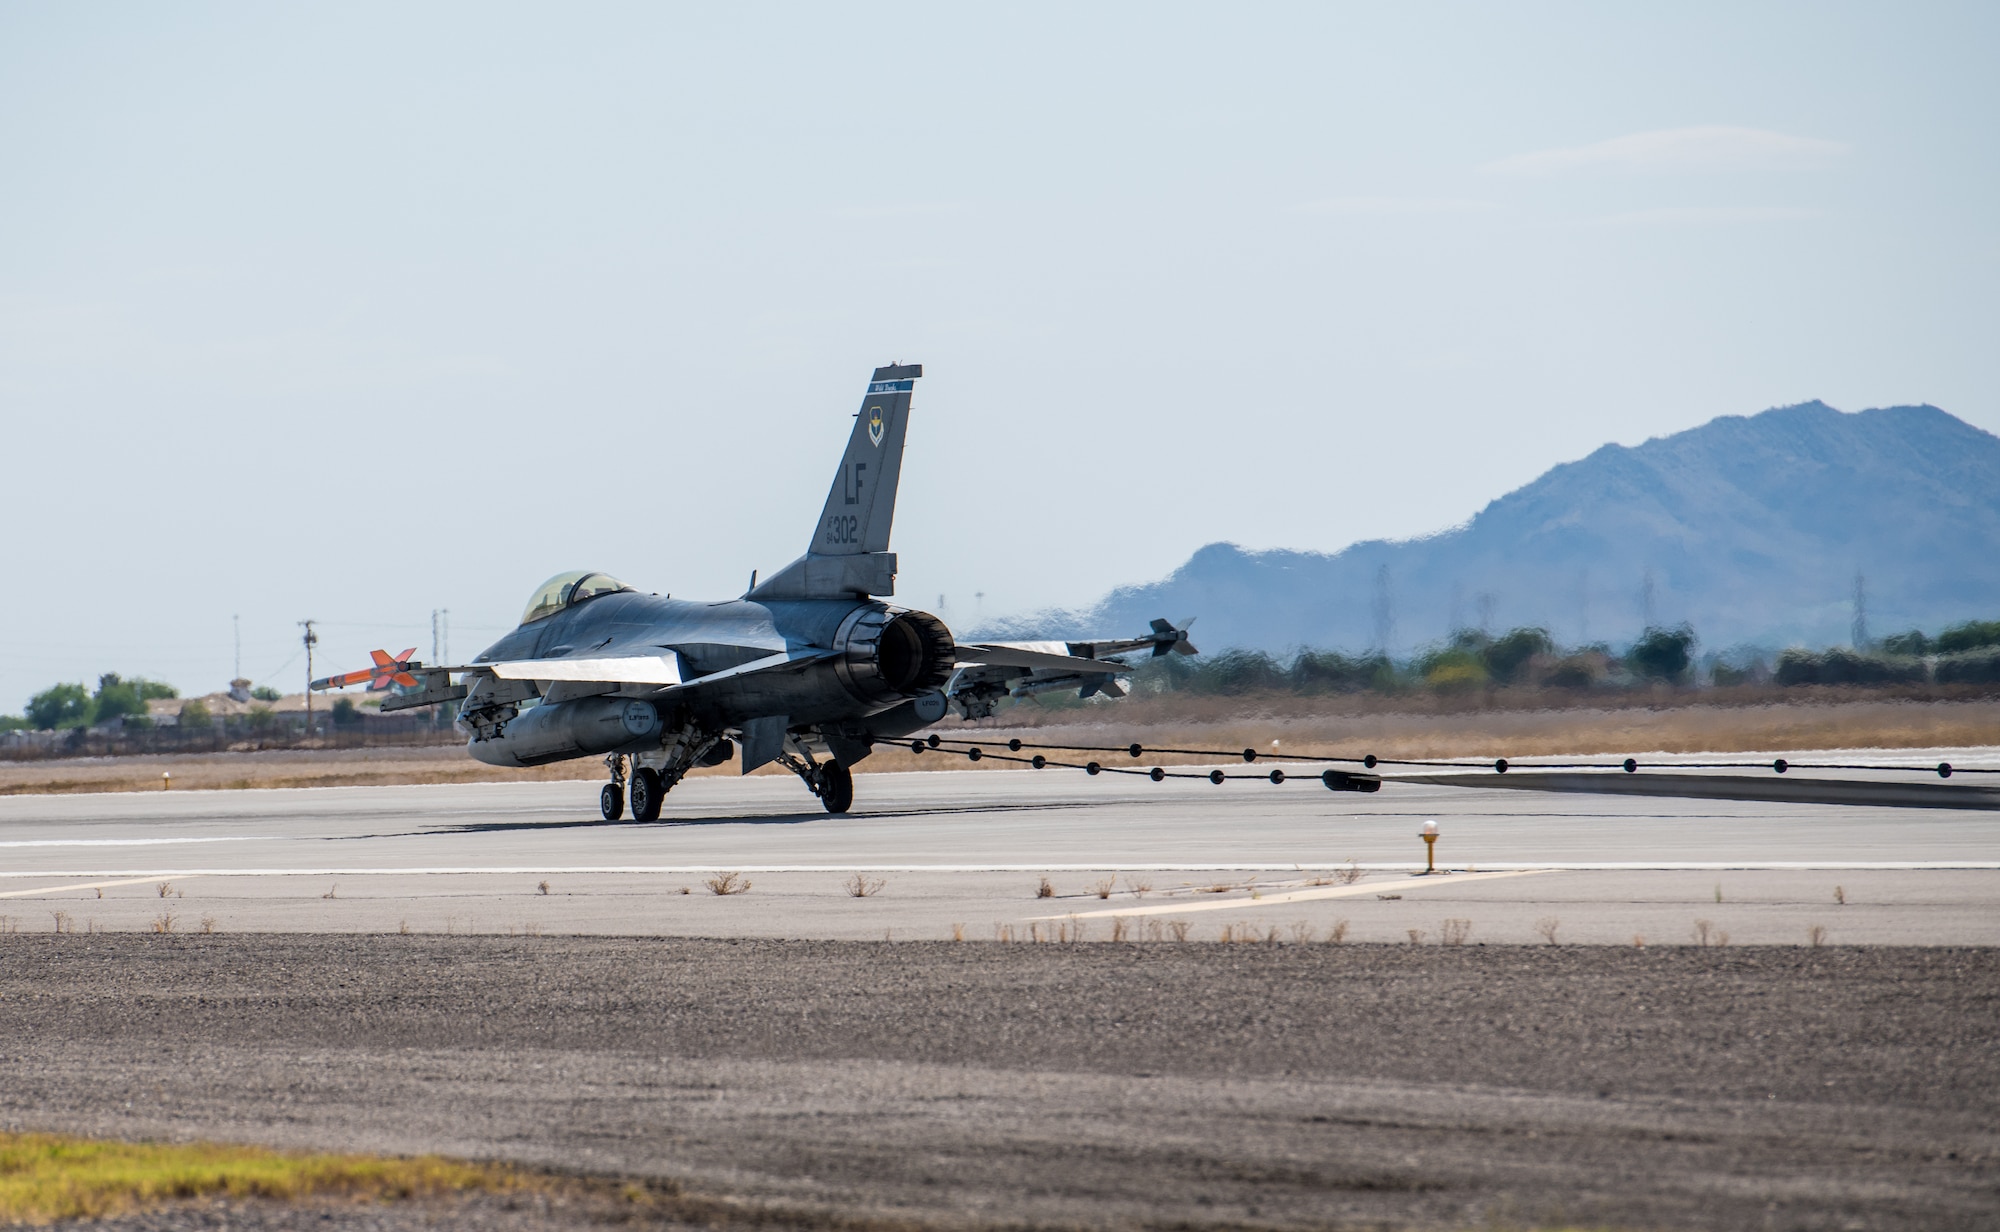 An F-16C Fighting Falcon stops after catching an emergency cable during an annual drill to recertify the BAK-12 arresting system May 8, 2020, at Luke Air Force Base, Ariz.